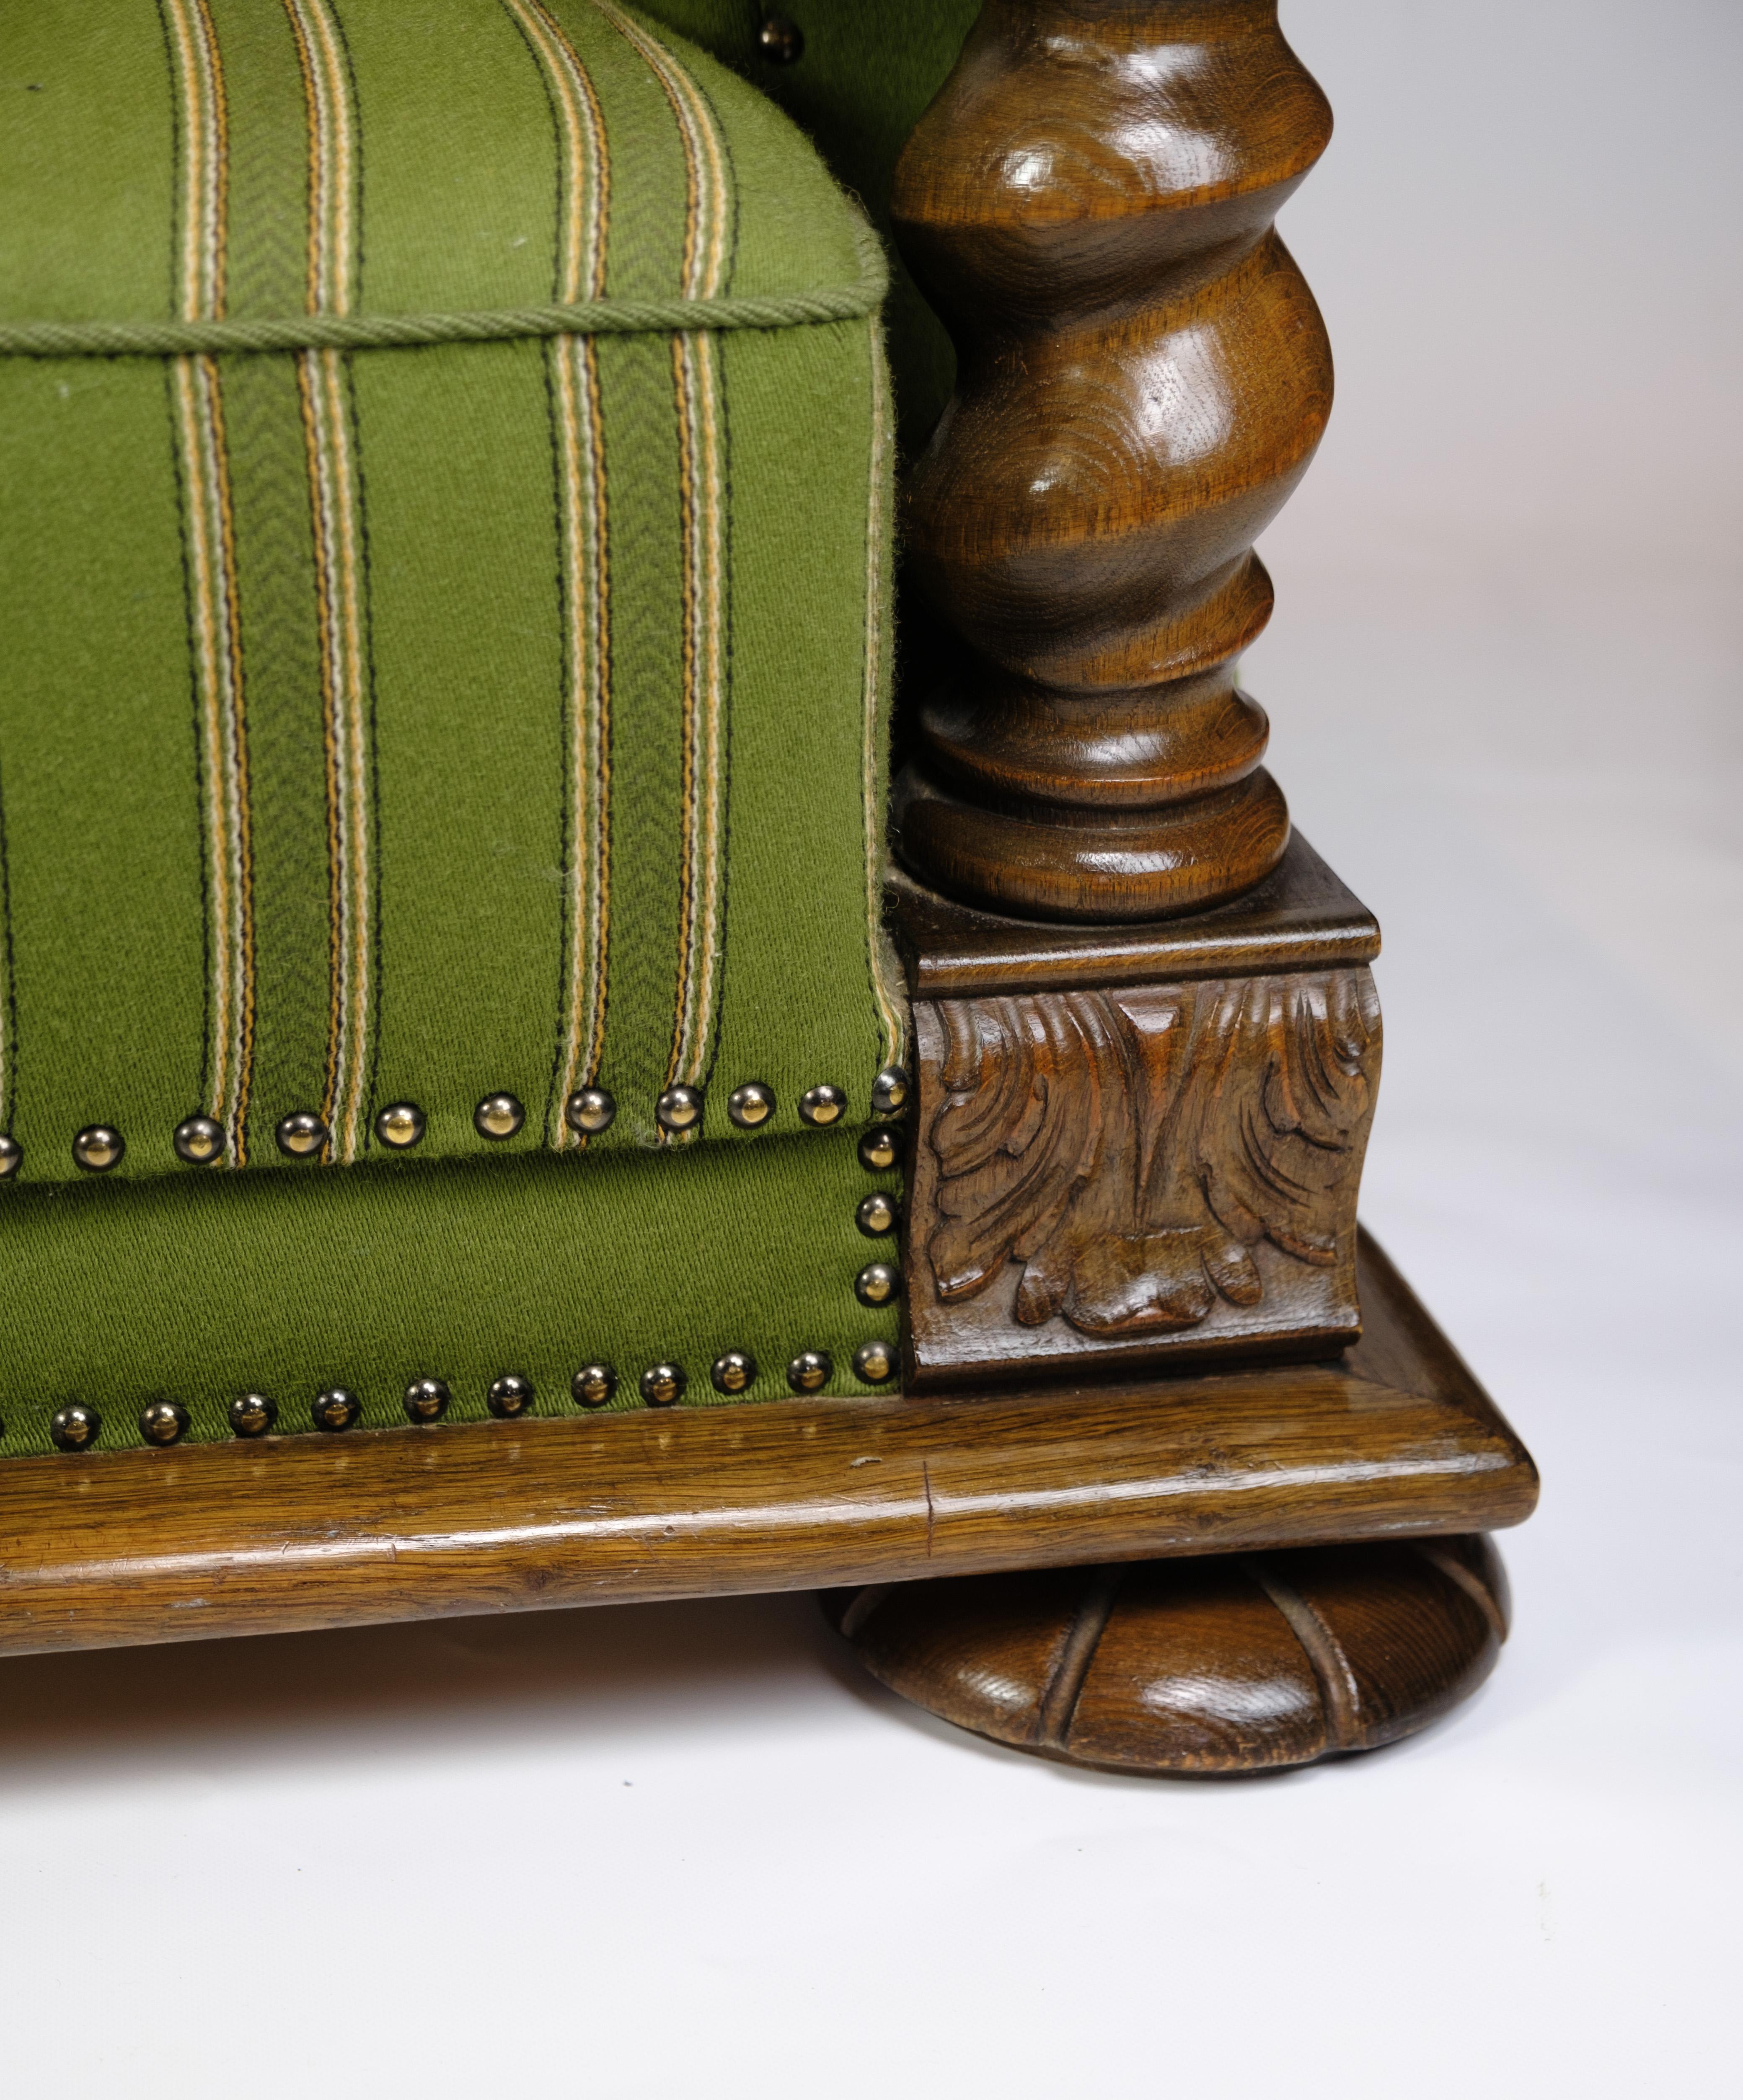 Danish Sofa in Green fabric with Wood Carvings from 1920s.